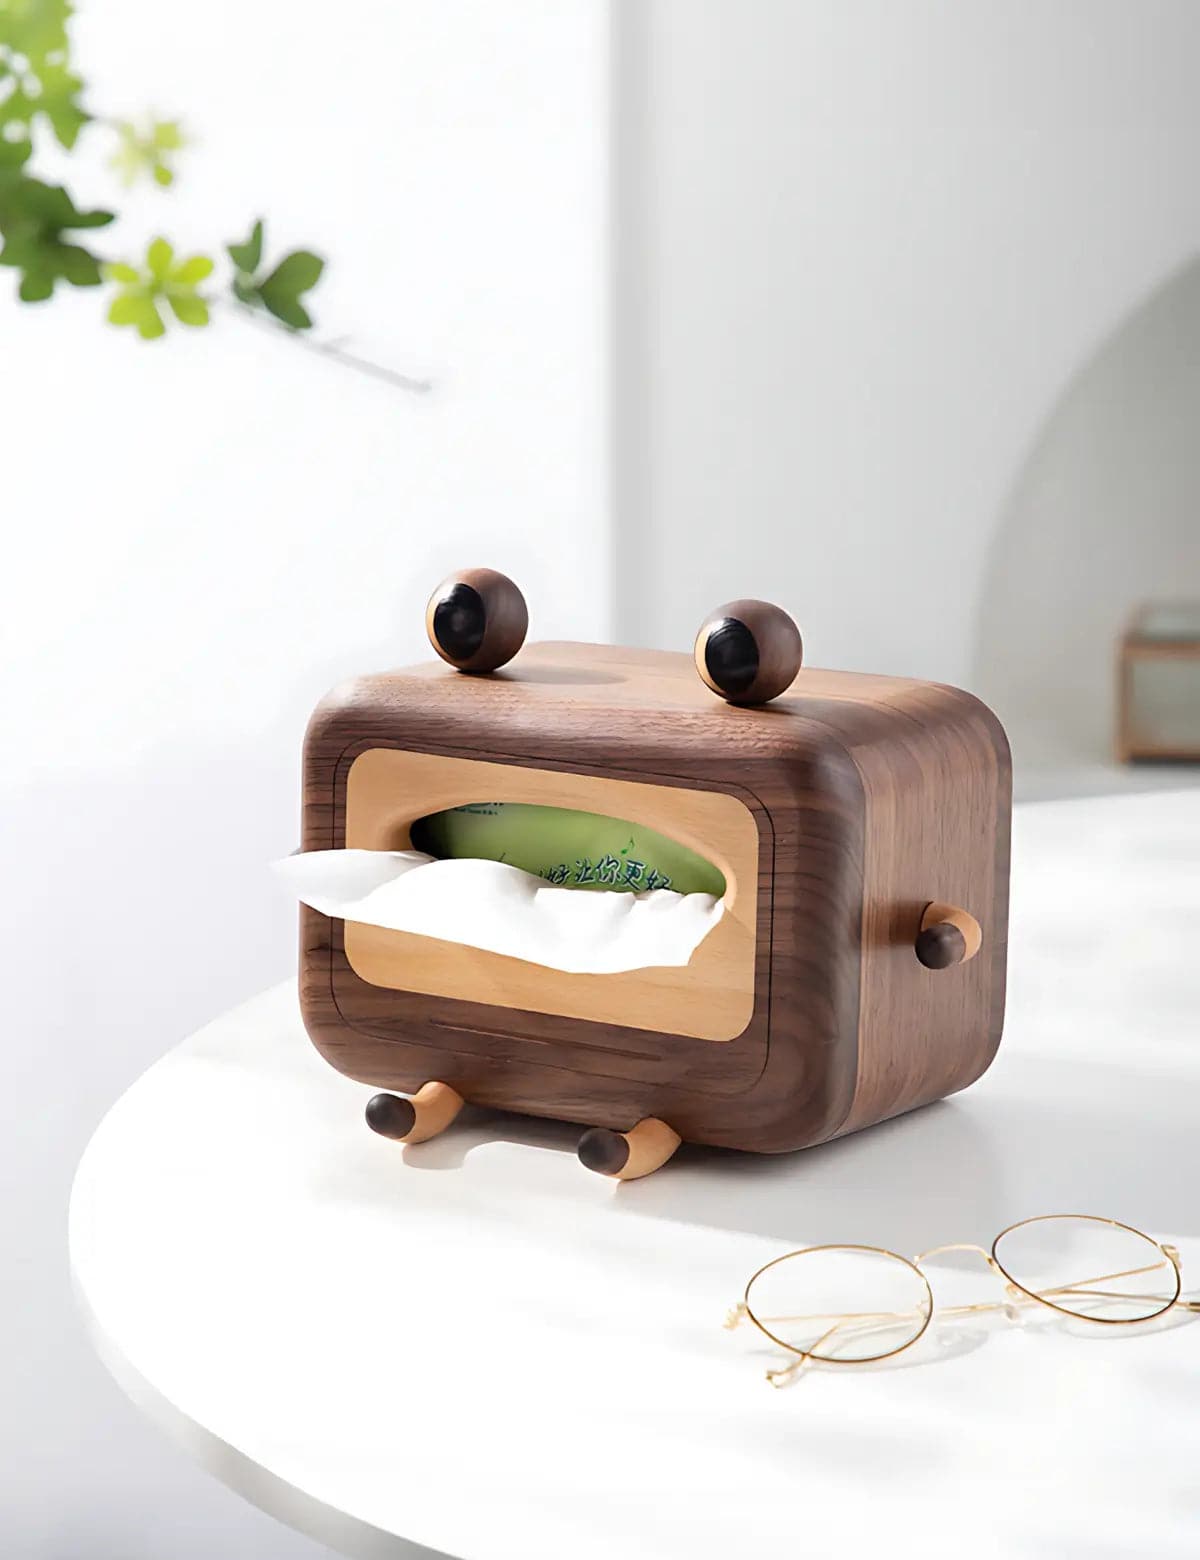 mr-frog-wooden-tissue-box-handcrafted-countertop-decor-06